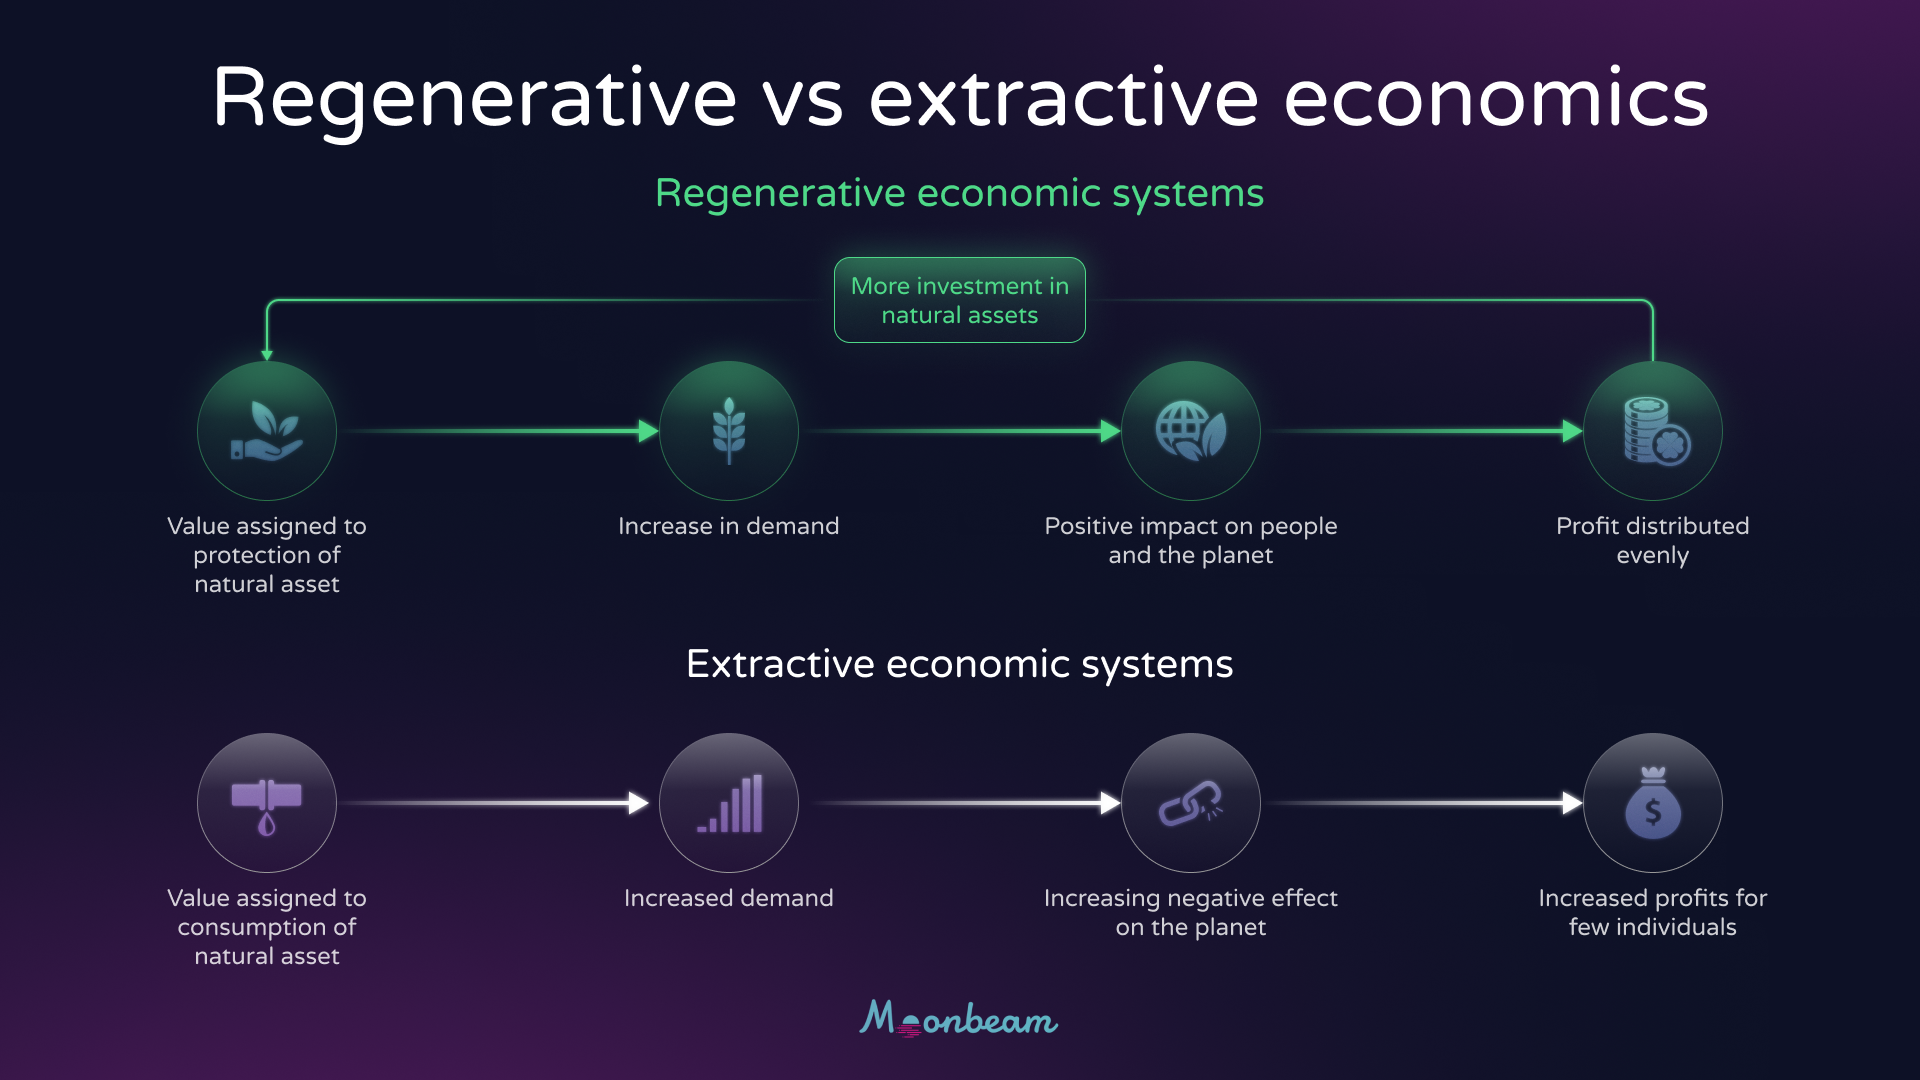 A diagram contrasting regenerative economic systems with extractive ones, emphasizing the sustainability goals of ReFi.